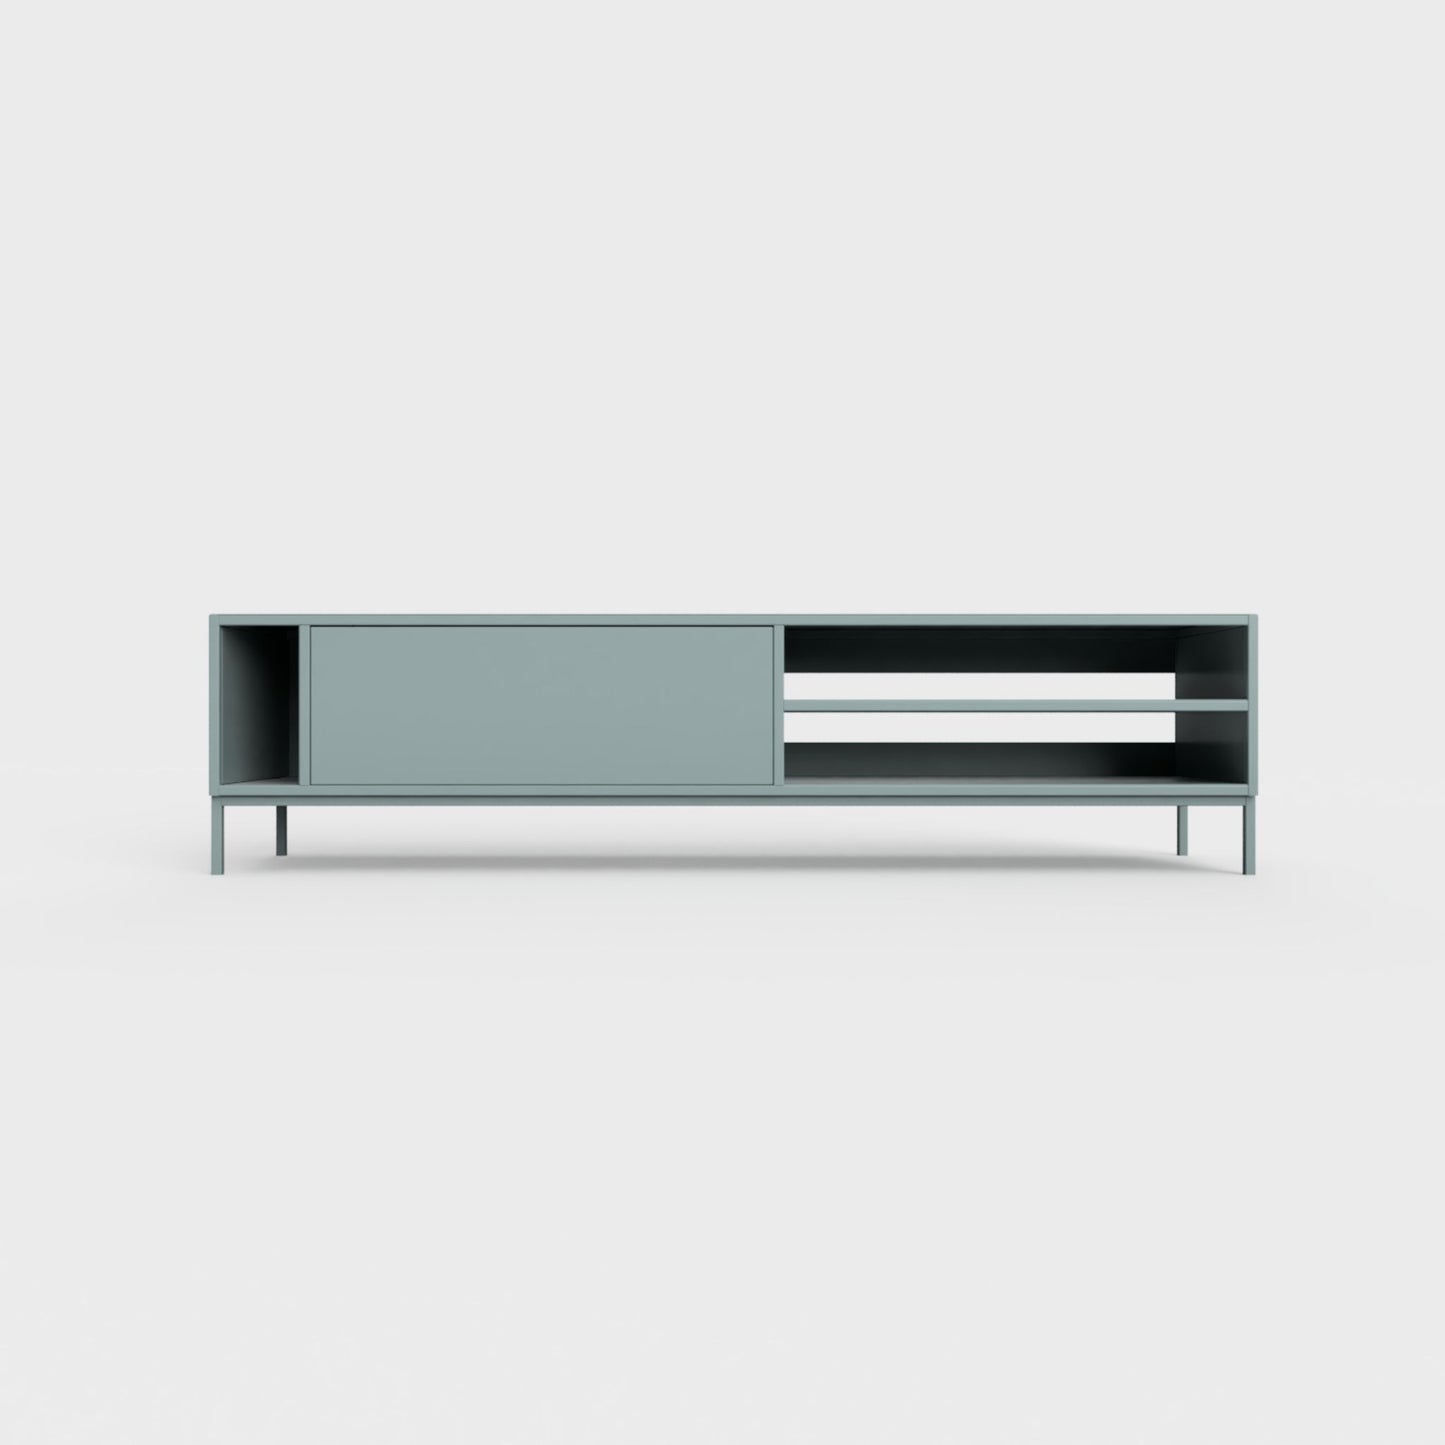 Prunus 03 Lowboard in celadon green color, powder-coated steel, elegant and modern piece of furniture for your living room